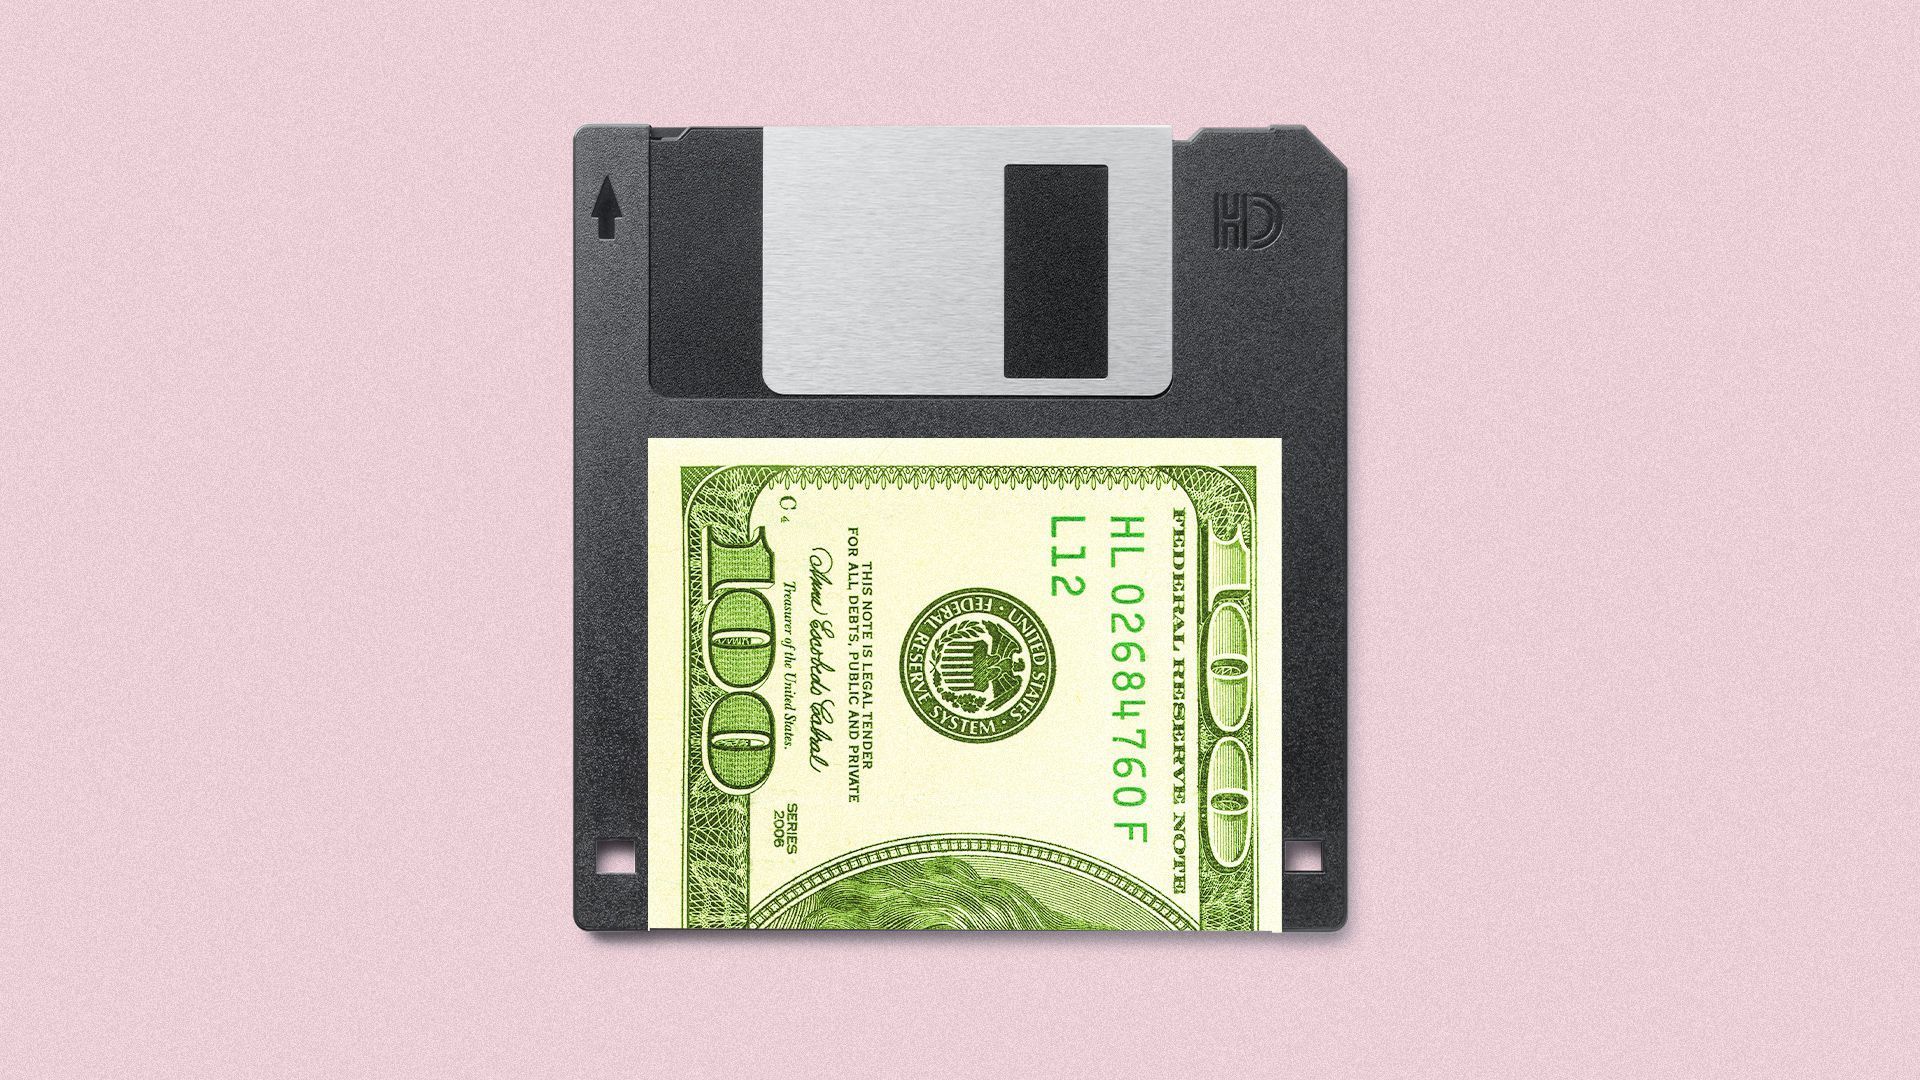 Illustration of a floppy disk with a dollar bill.